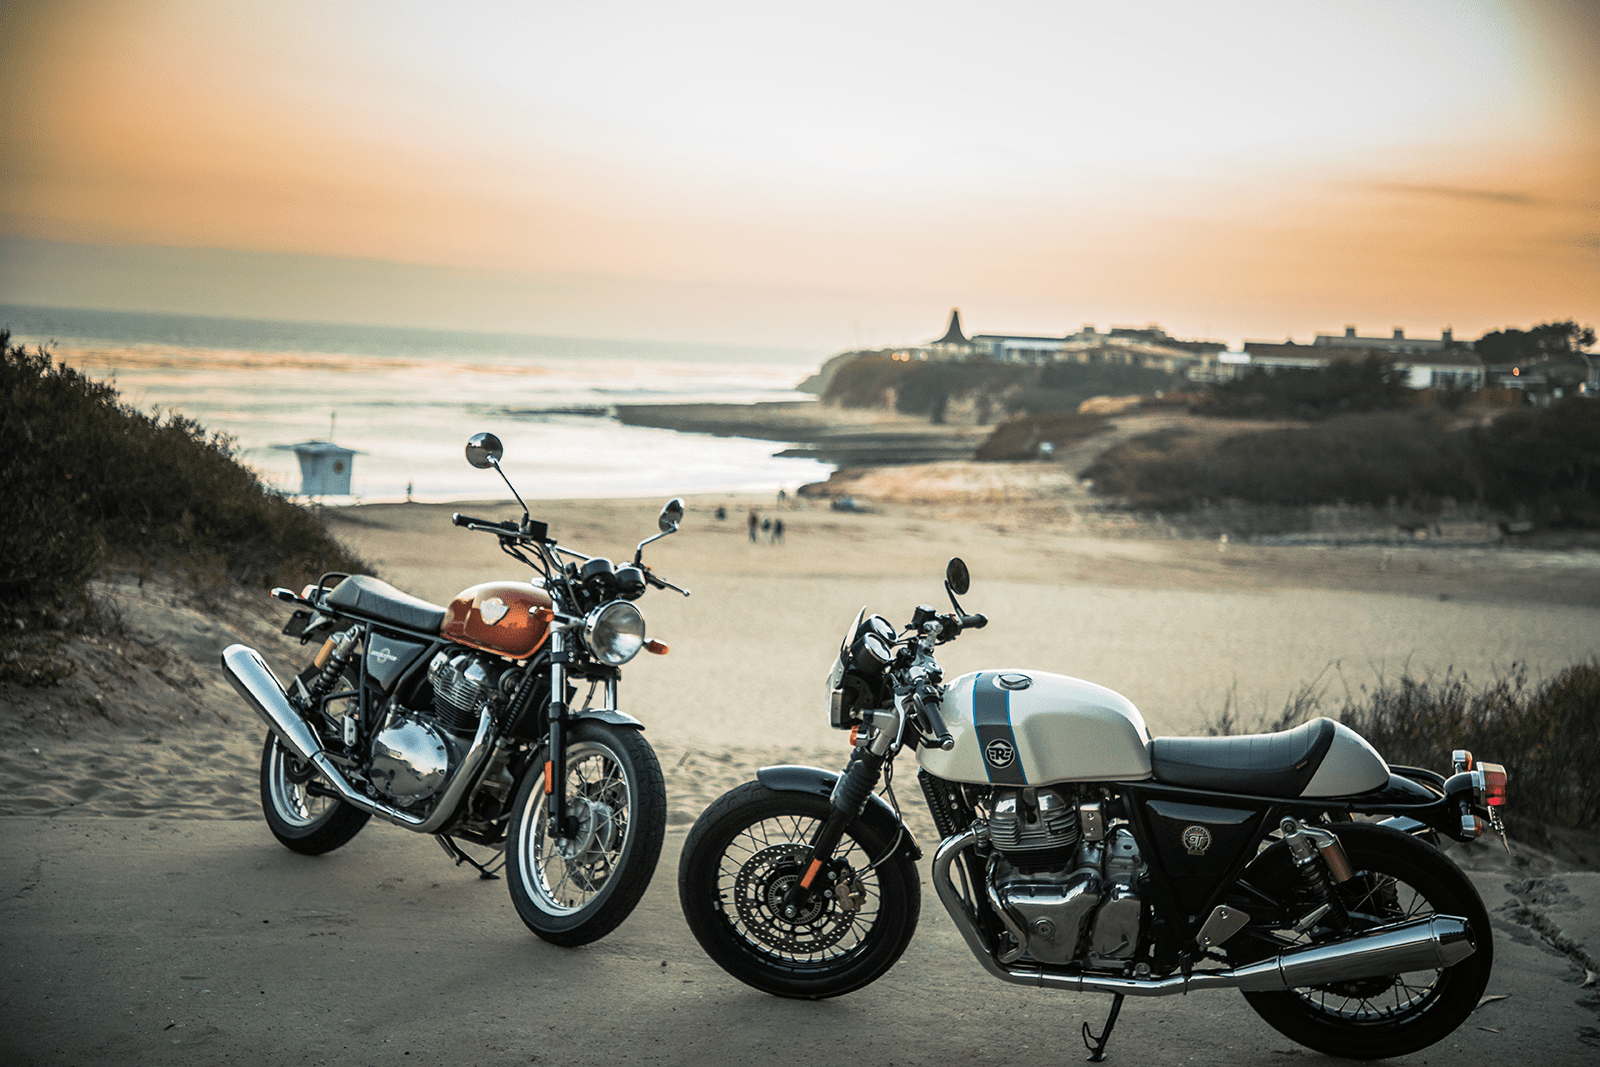 Royal Enfield Motorcycles at Beach for Sunset